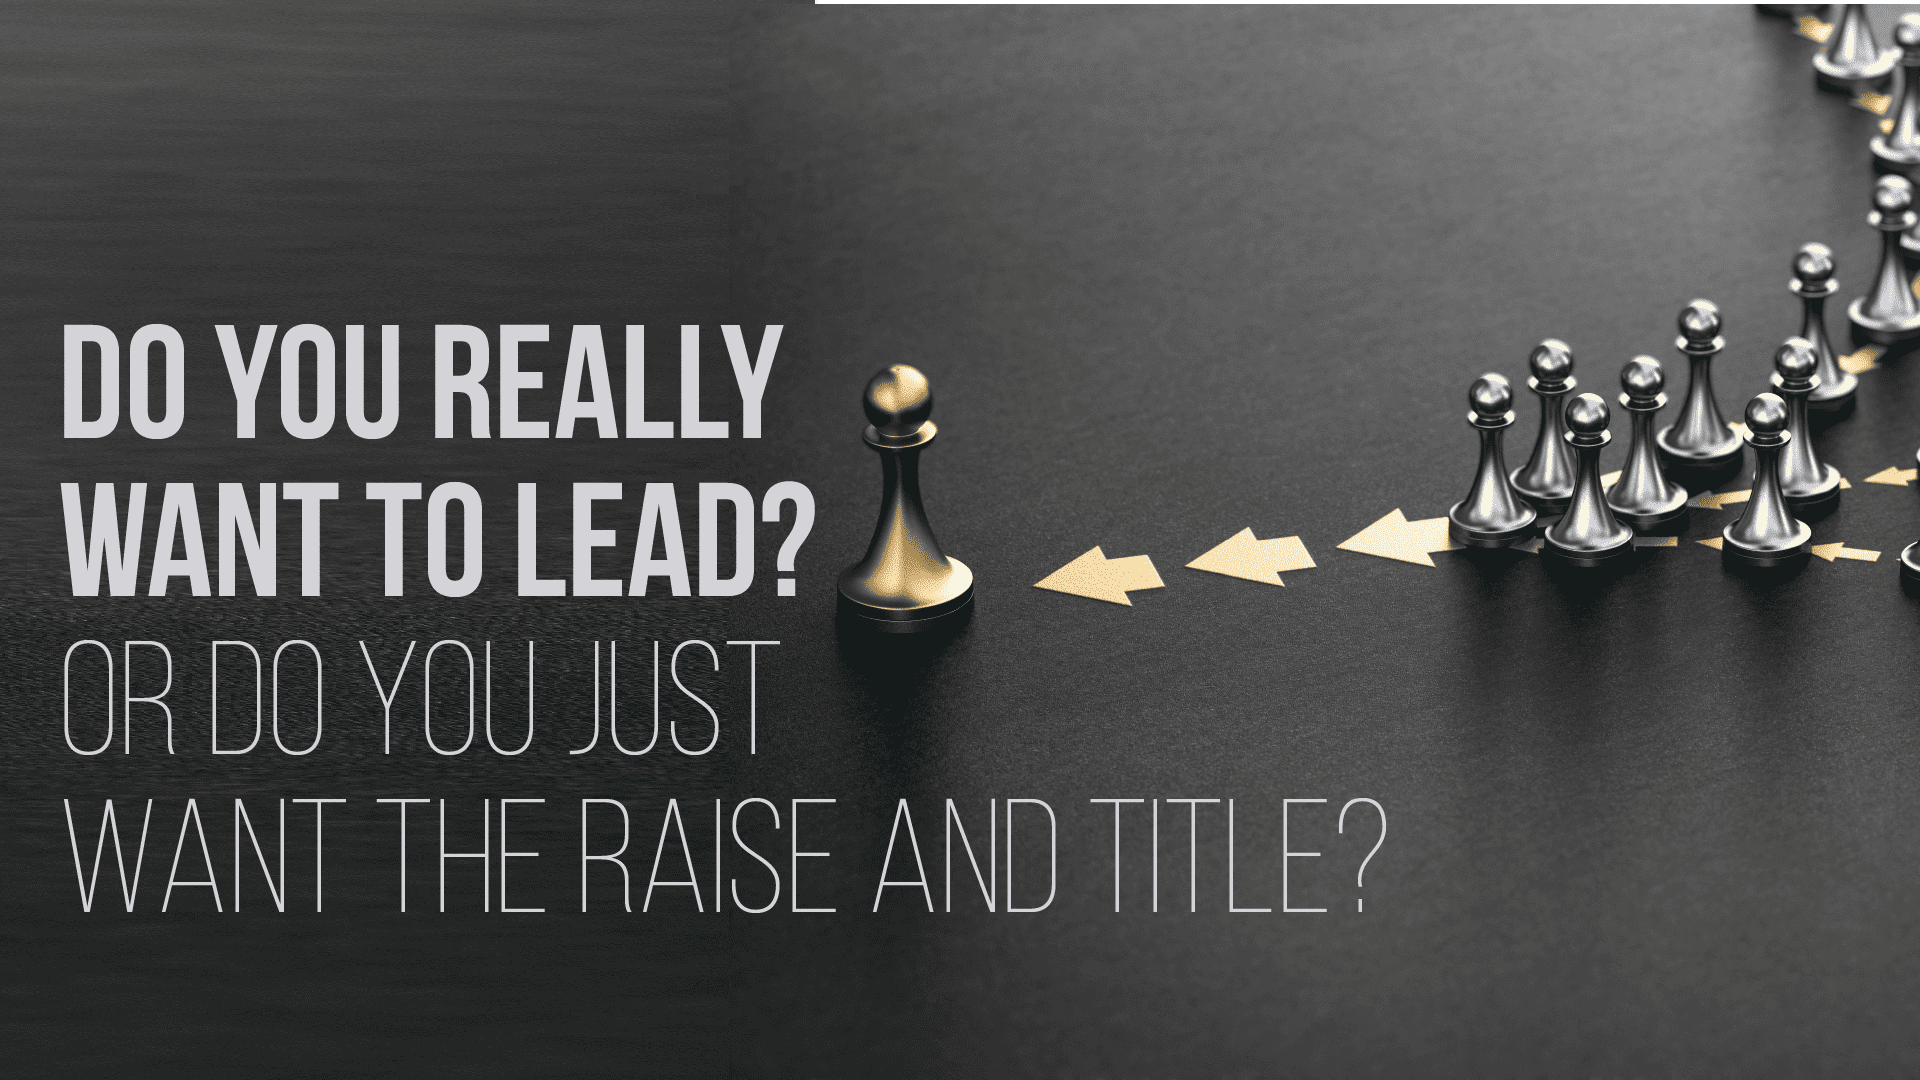 Do You Really Want to Lead? Or Do You Just Want the Raise and Title?